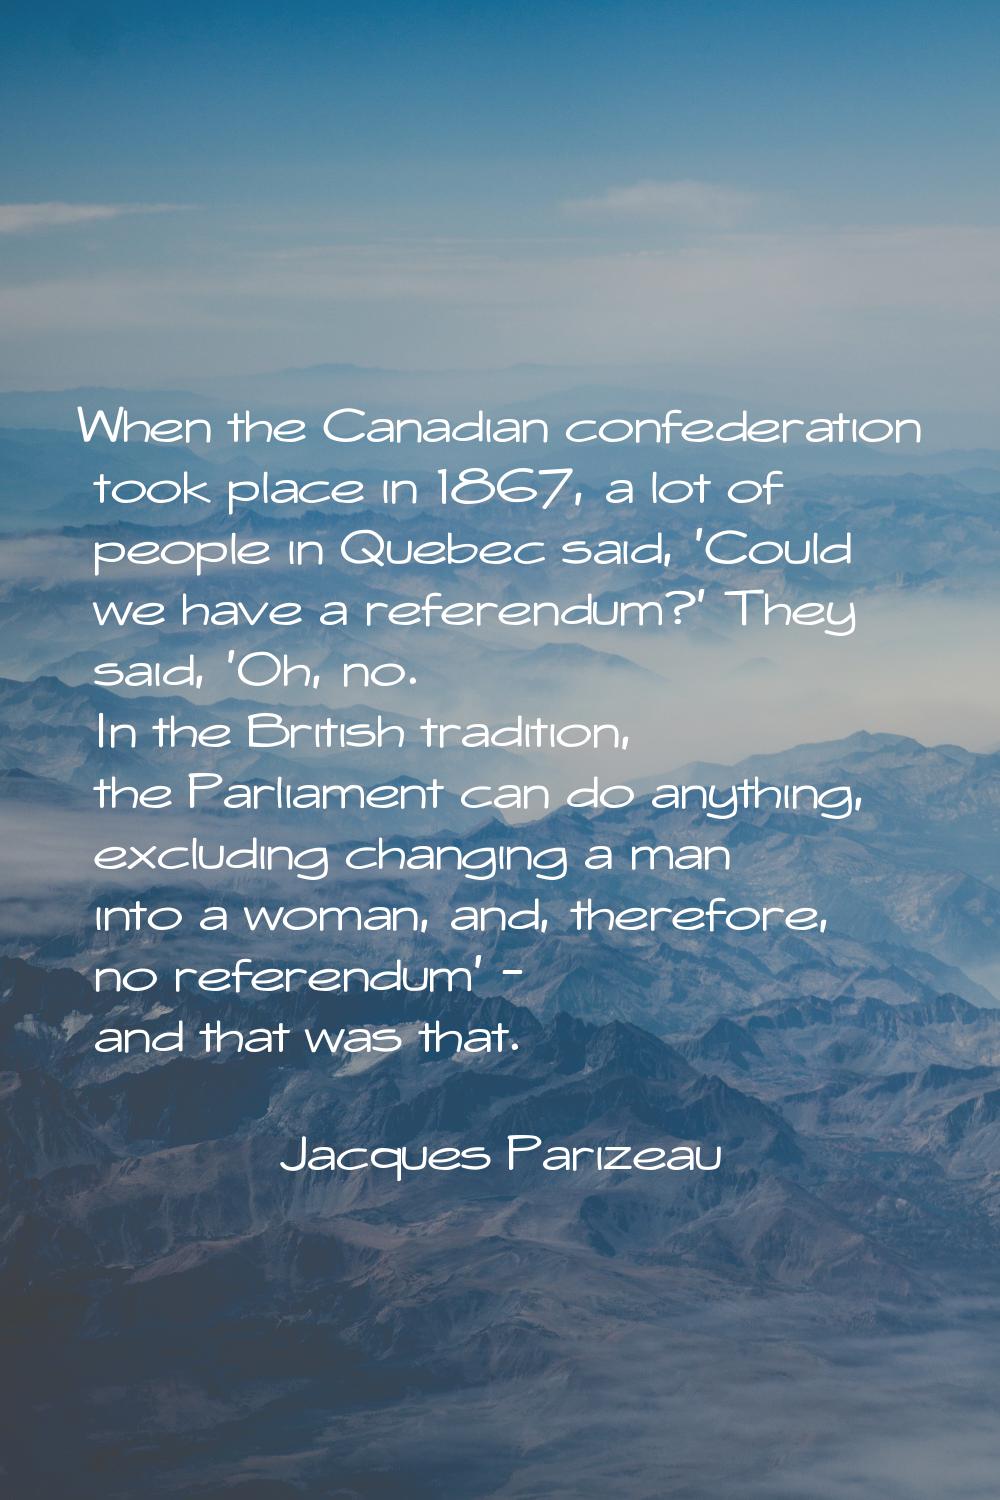 When the Canadian confederation took place in 1867, a lot of people in Quebec said, 'Could we have 